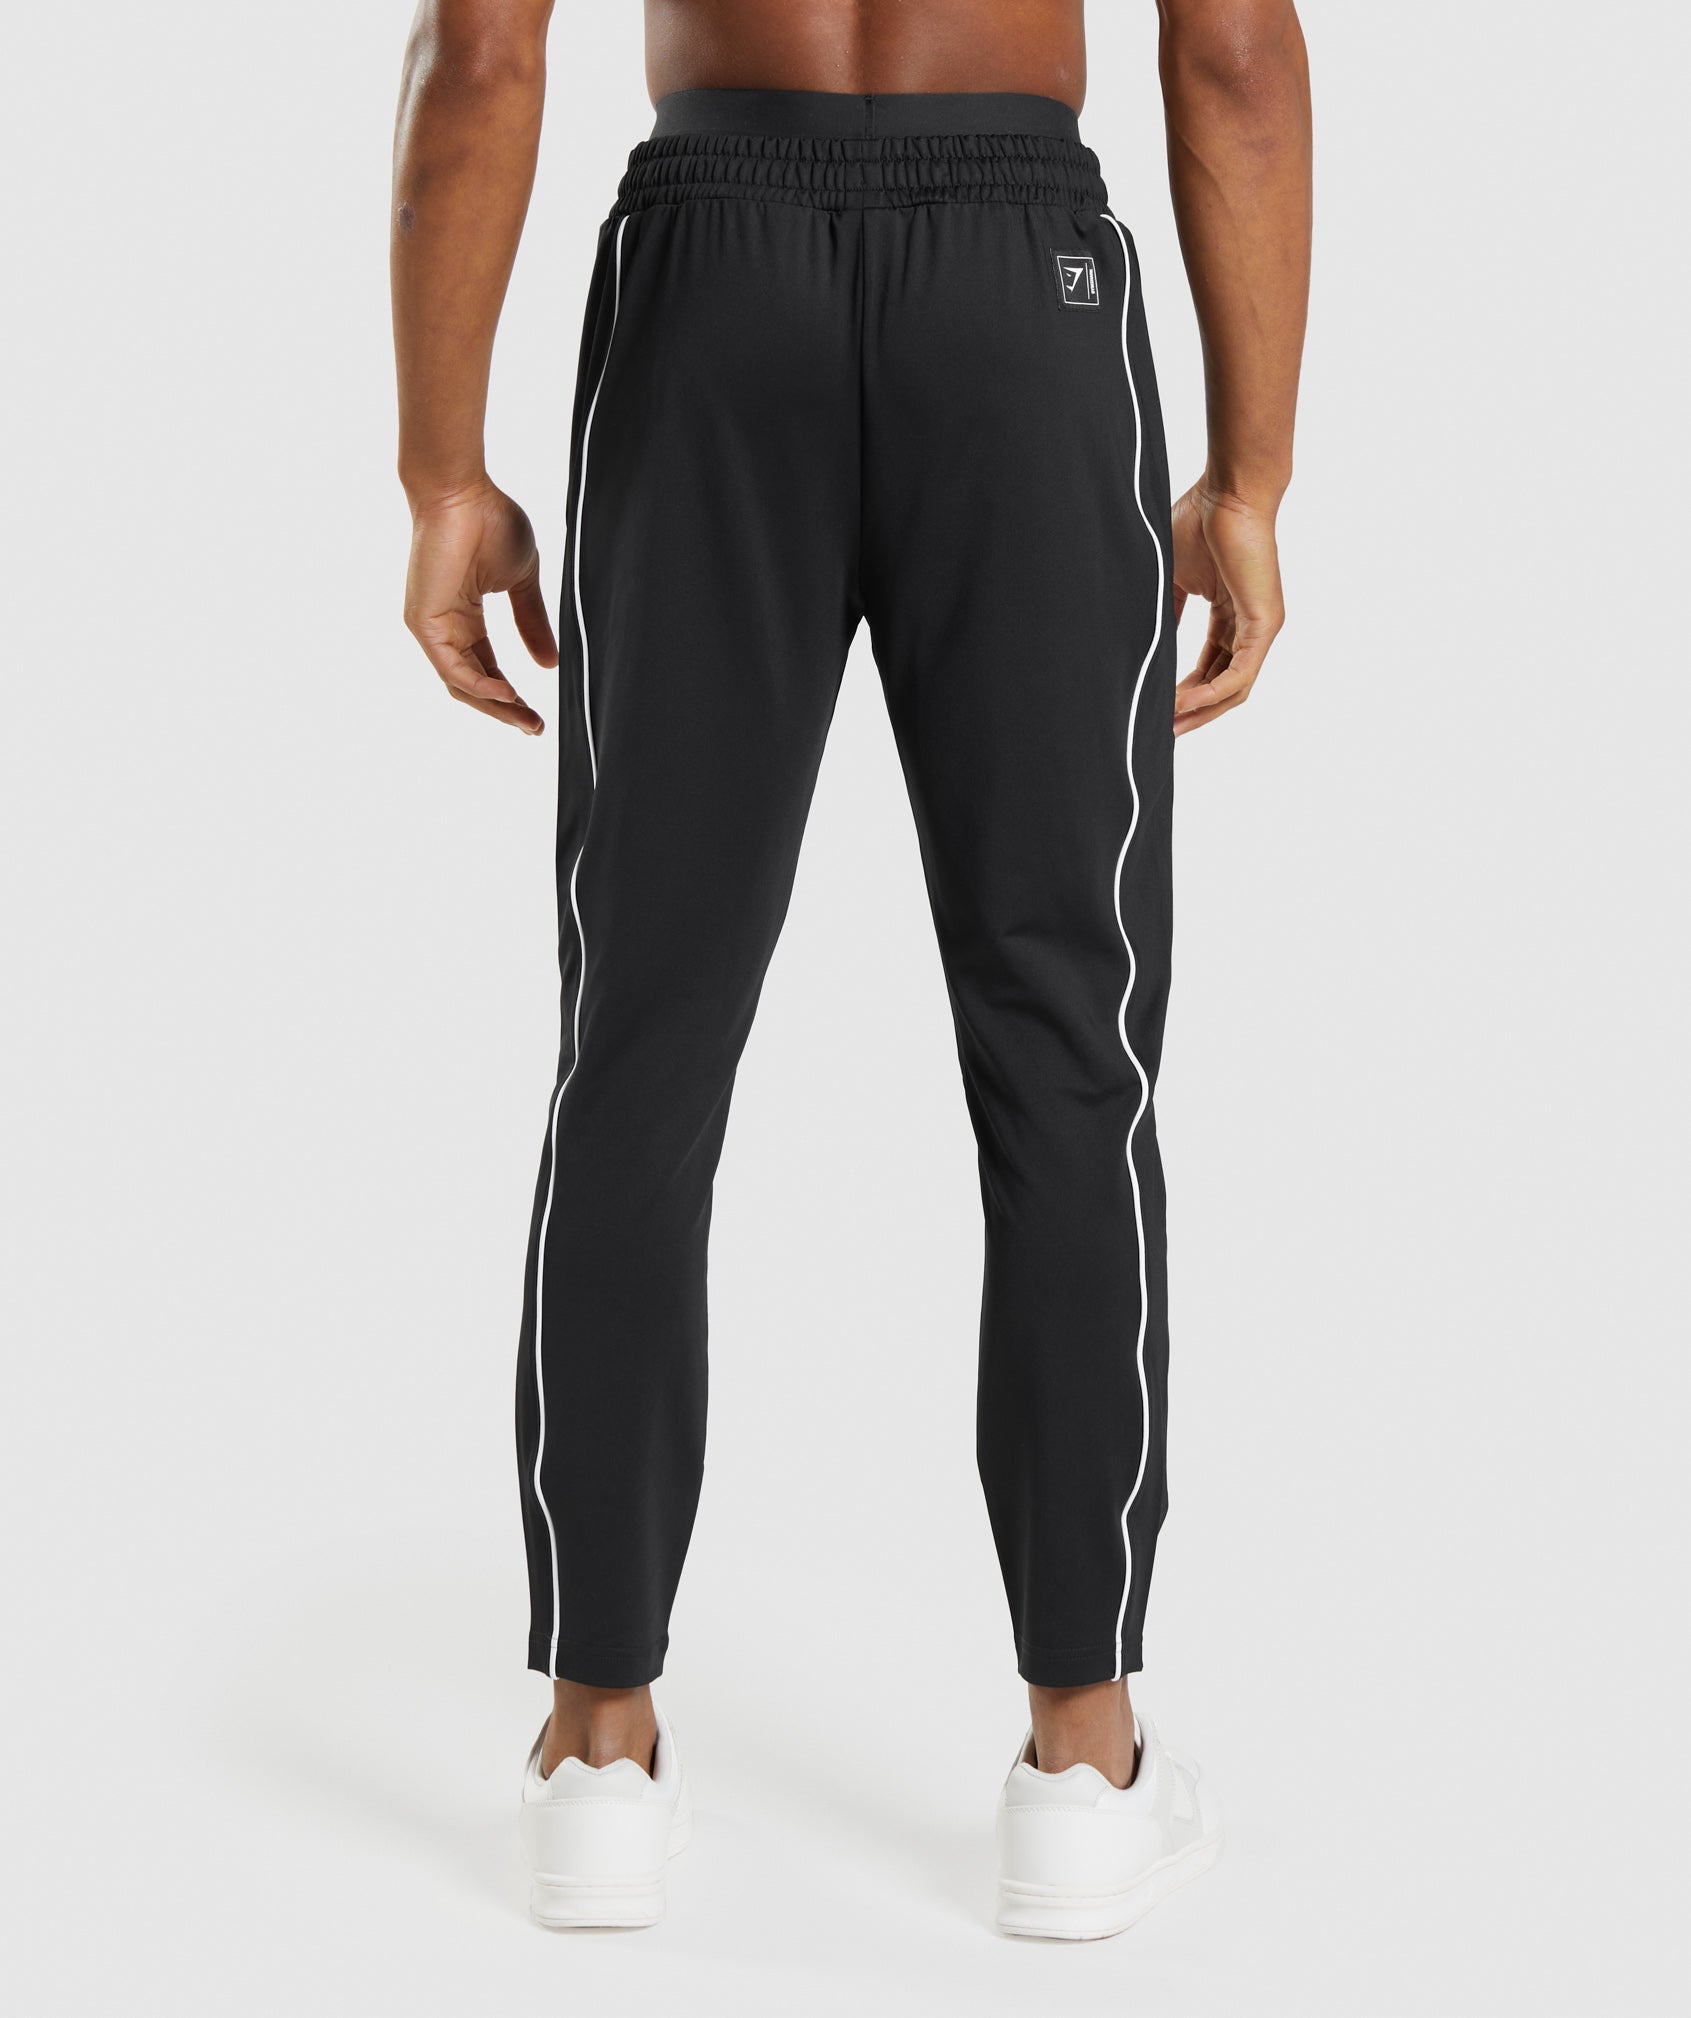 Recess Joggers in Black/White - view 2